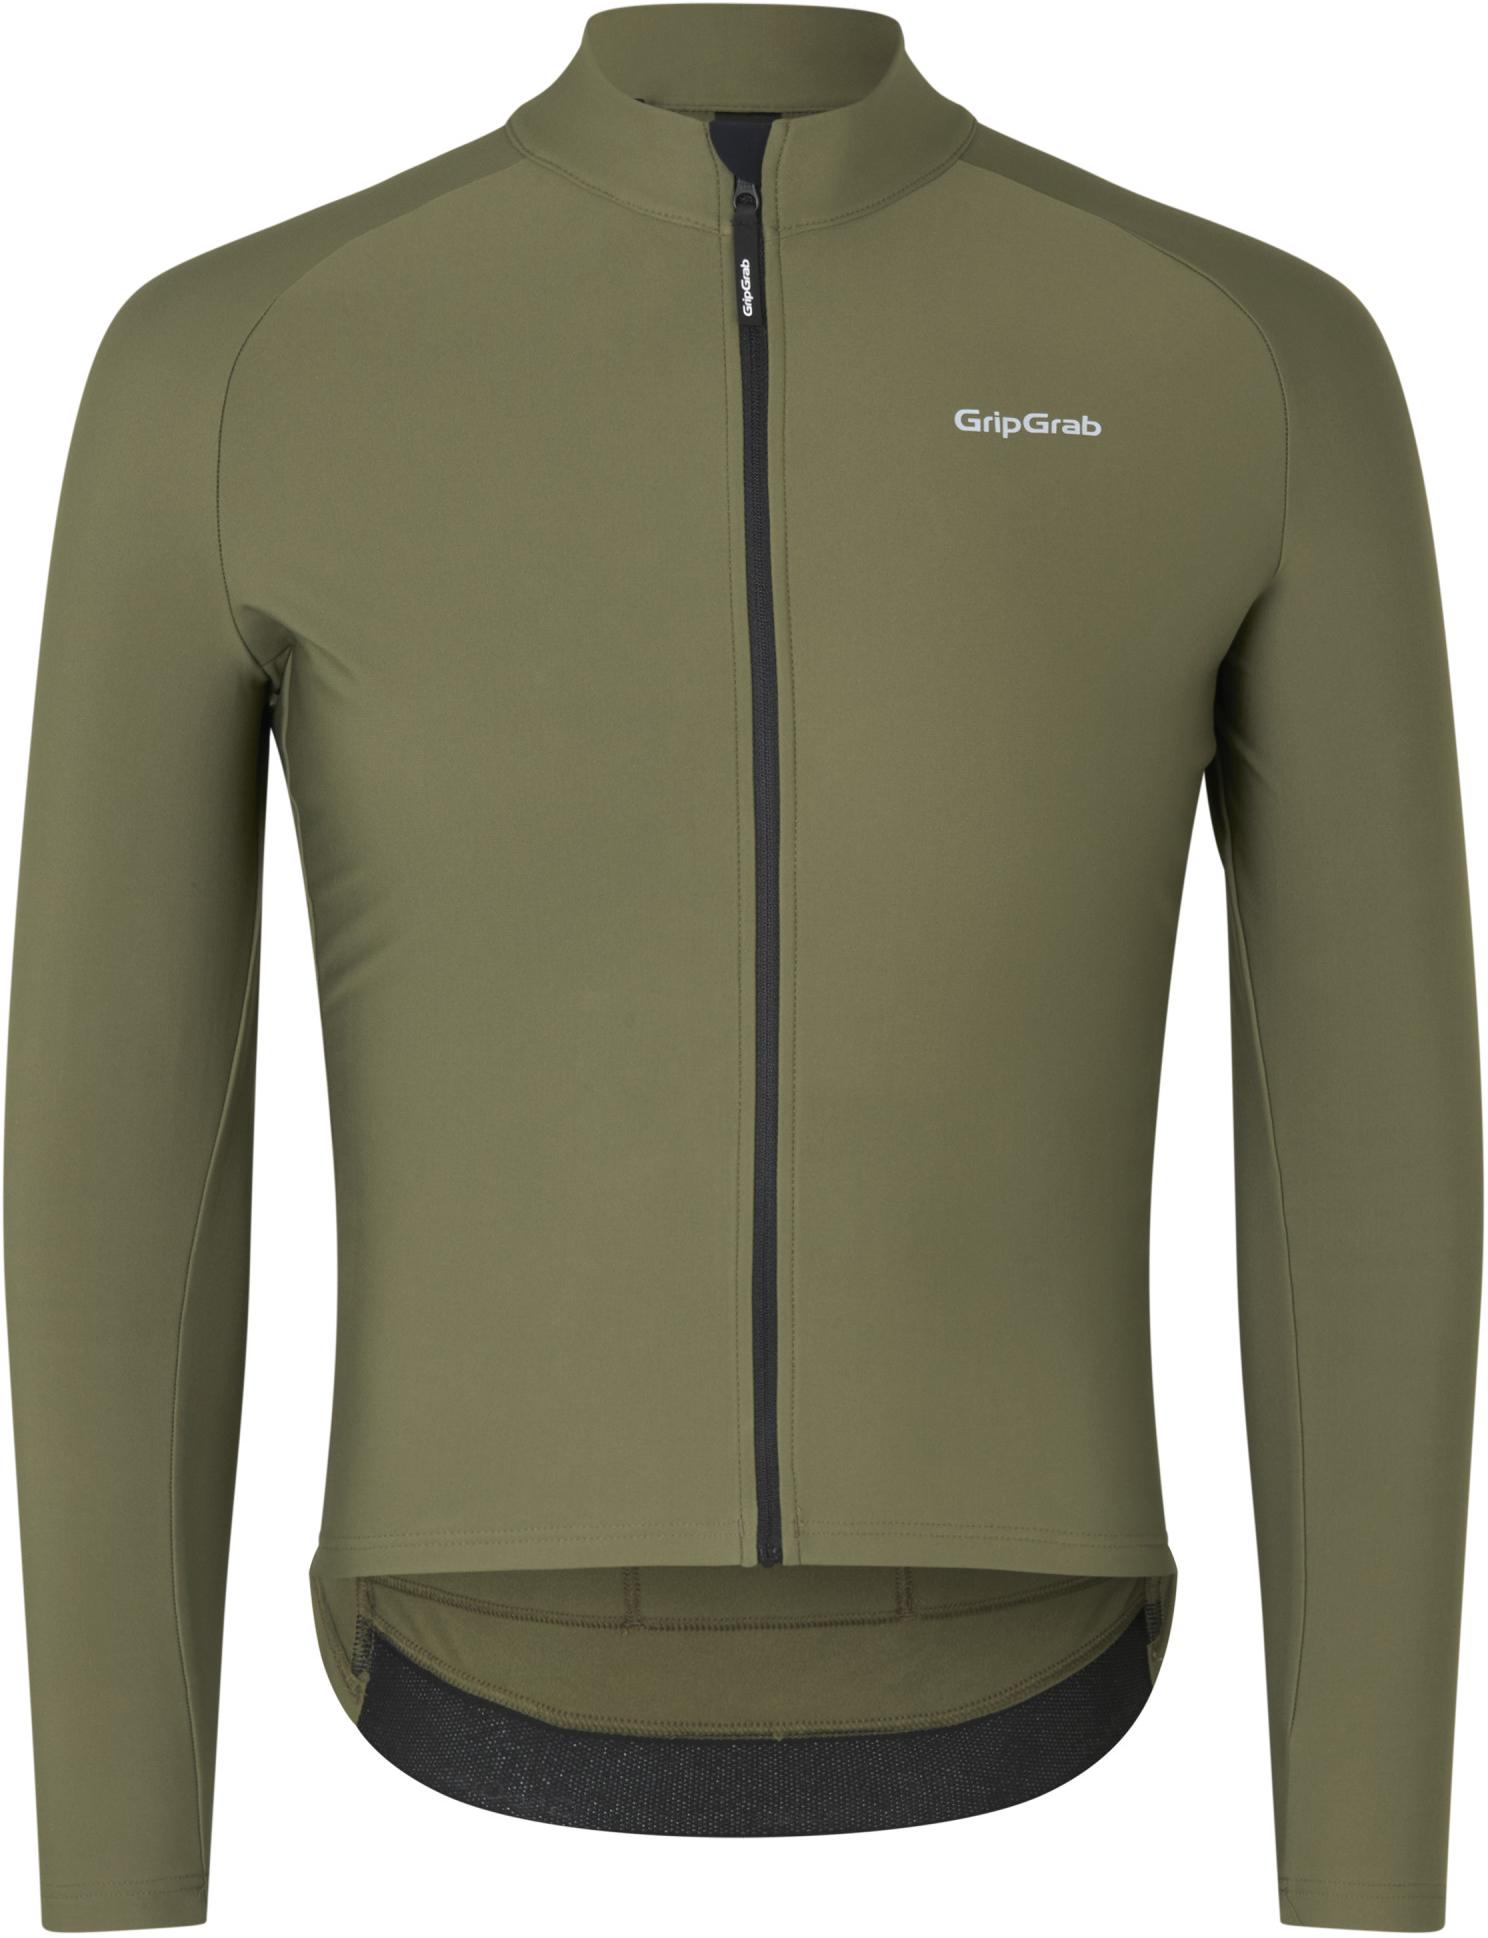 Gripgrab Thermapace Thermal Long Sleeve Jersey - Olive Green